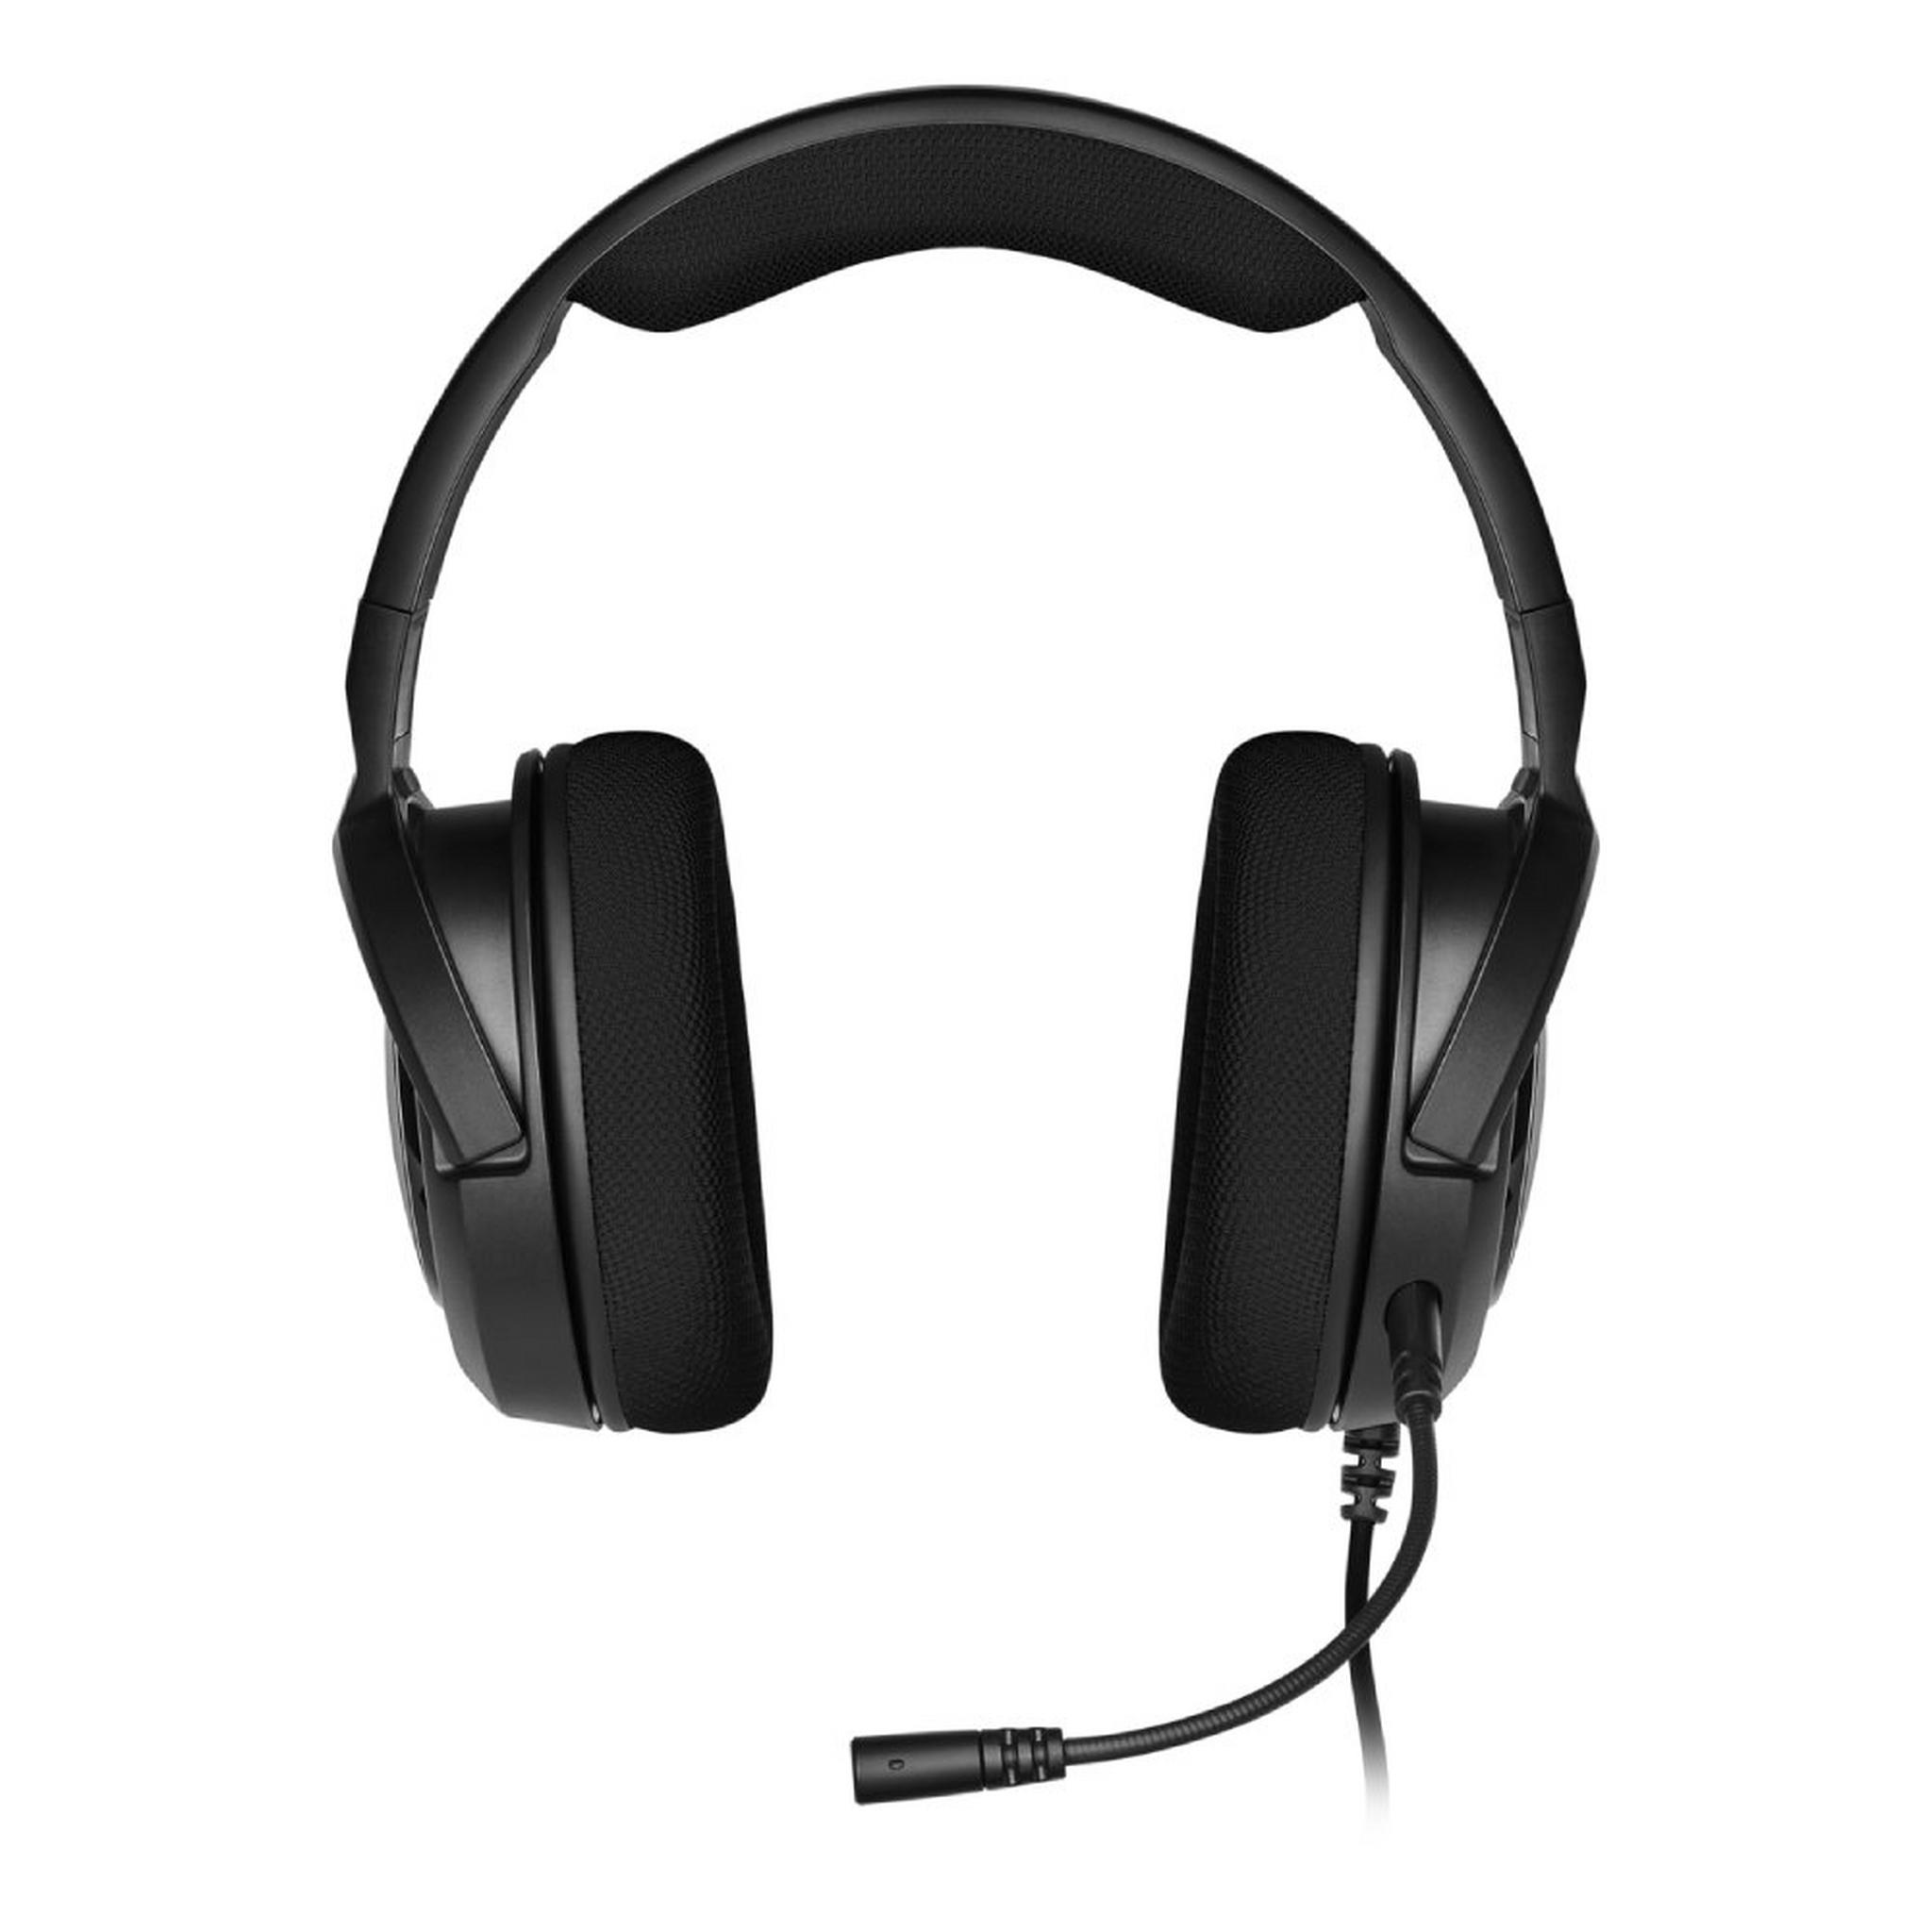 Corsair HS35 Stereo Wired Gaming Headset - Carbon